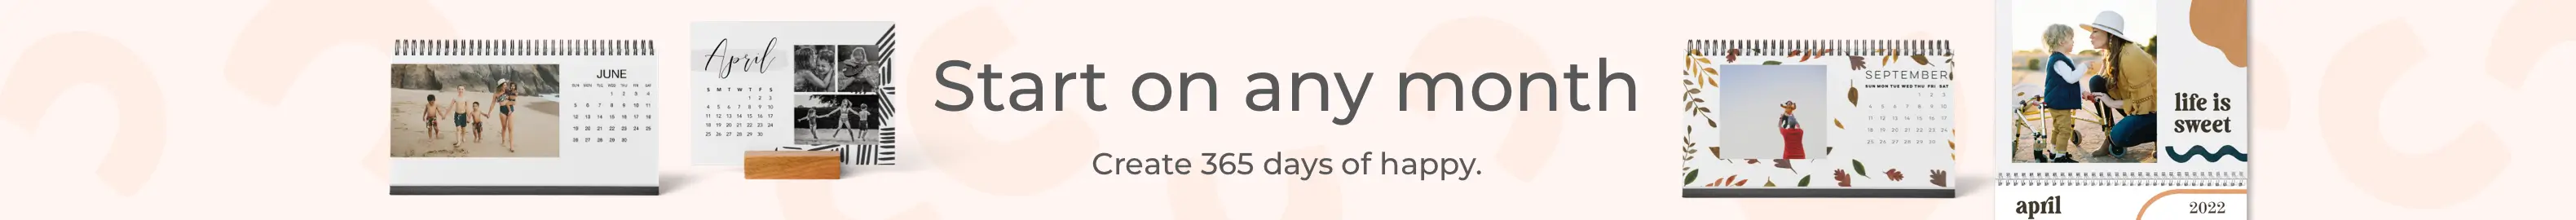 Start on any month. Create 365 days of happy.